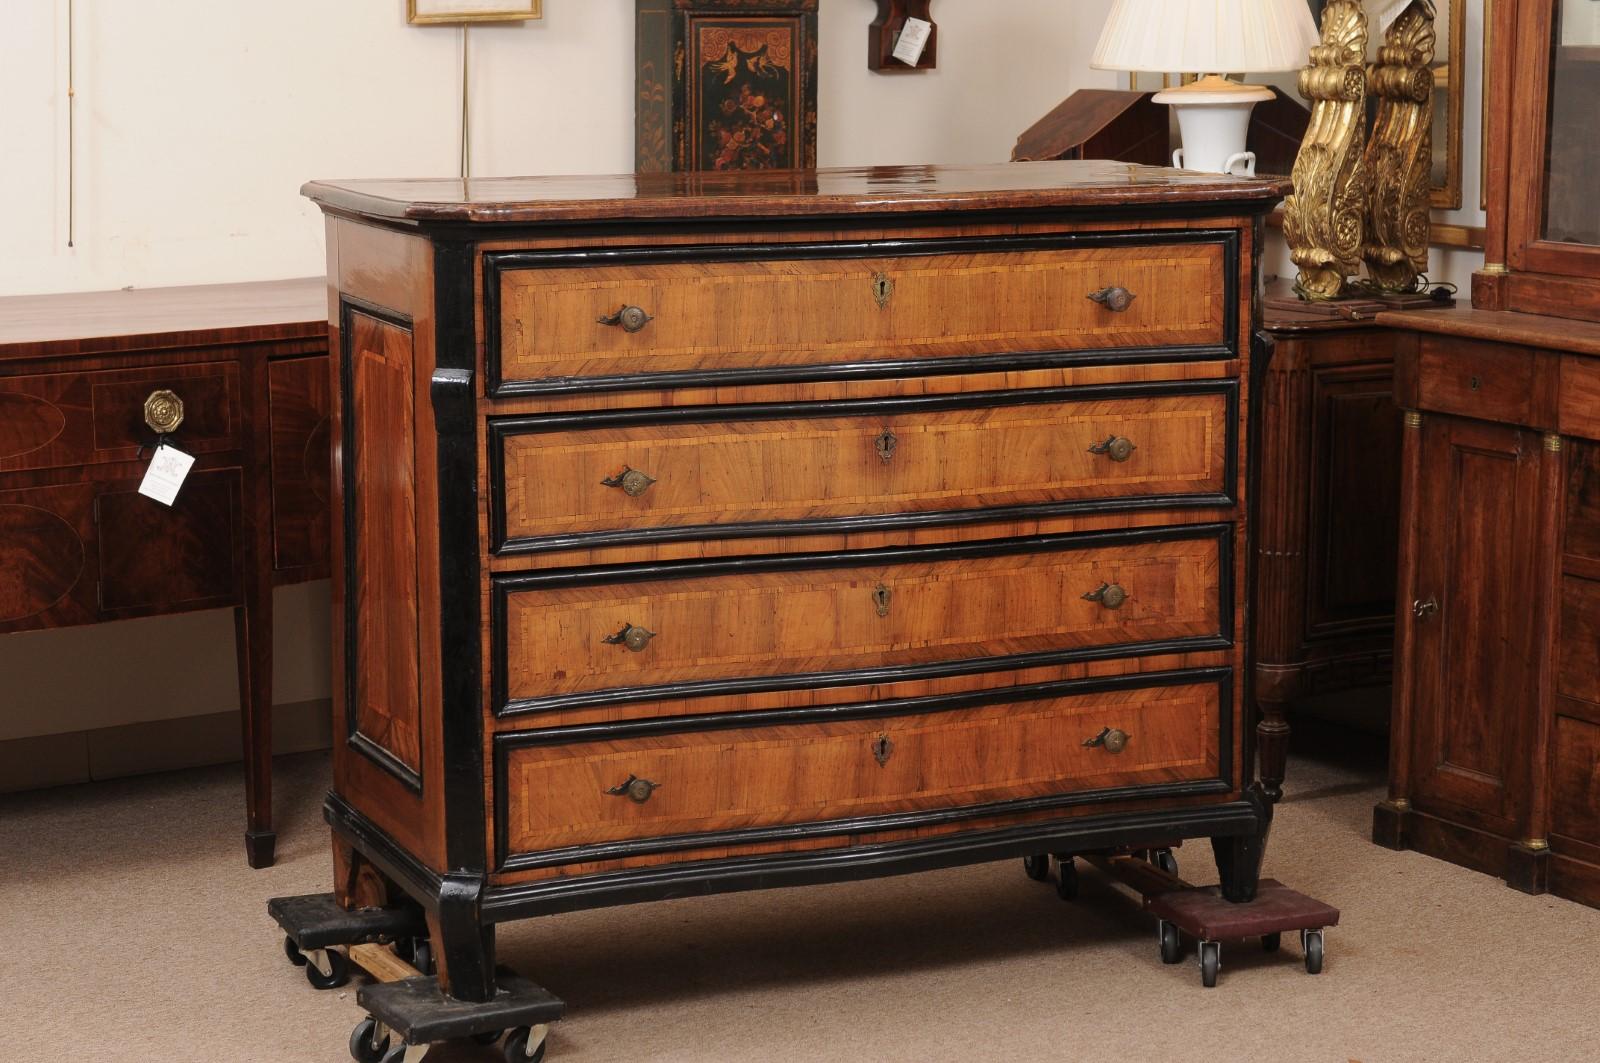 Large Early 18th Century Italian Canterano Walnut Inlaid Commode with 4 Drawers & Ebonized Detail